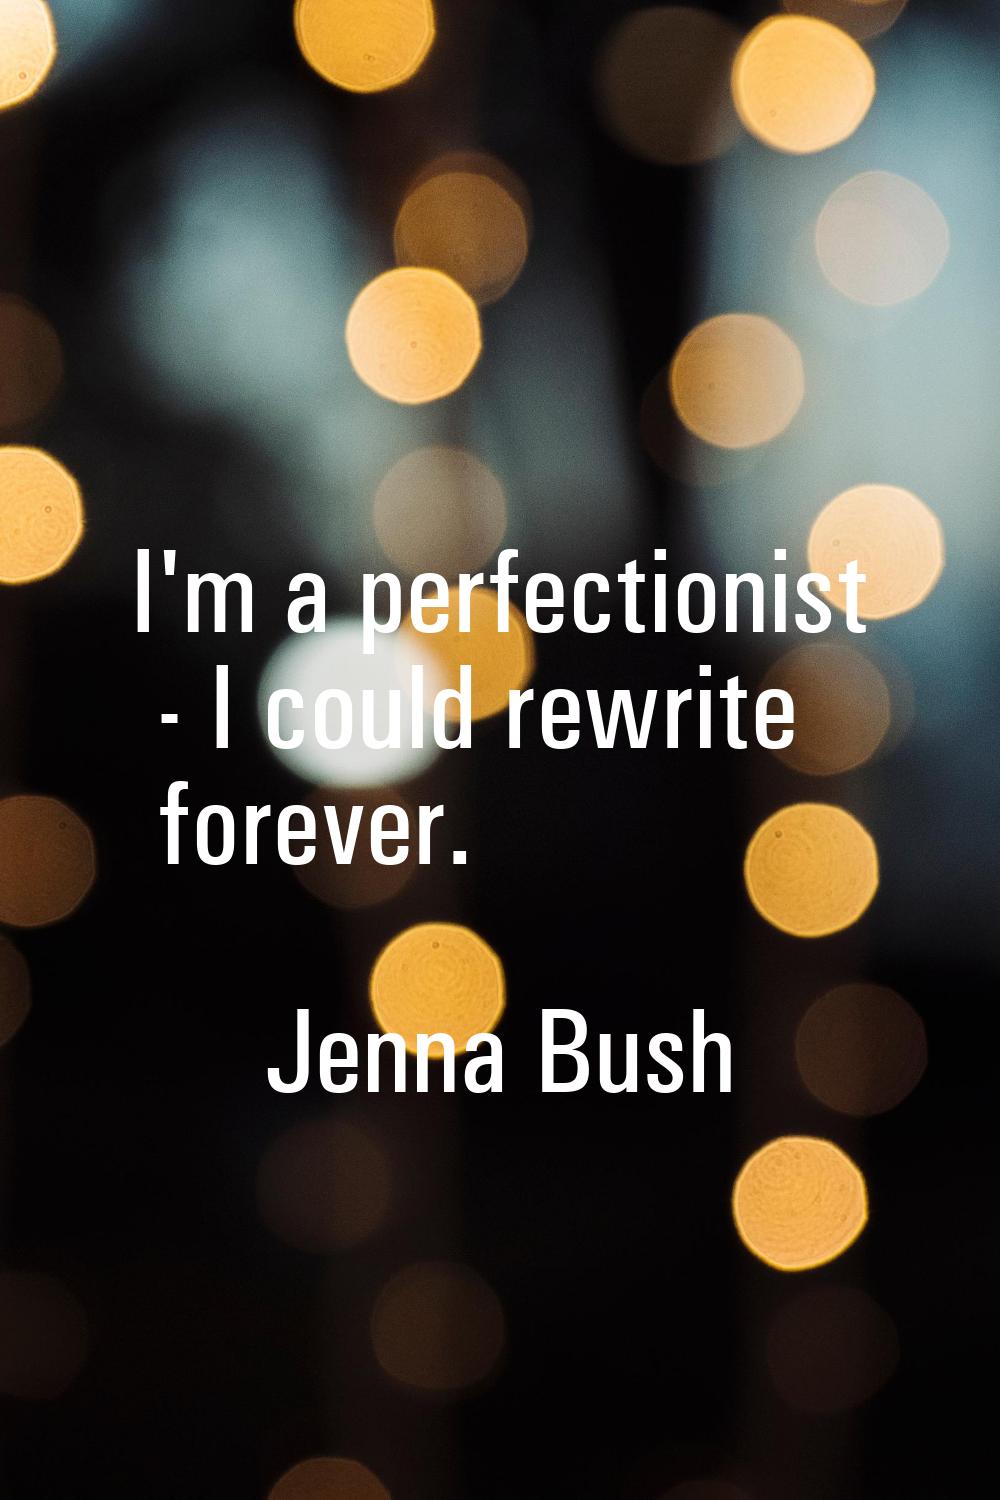 I'm a perfectionist - I could rewrite forever.